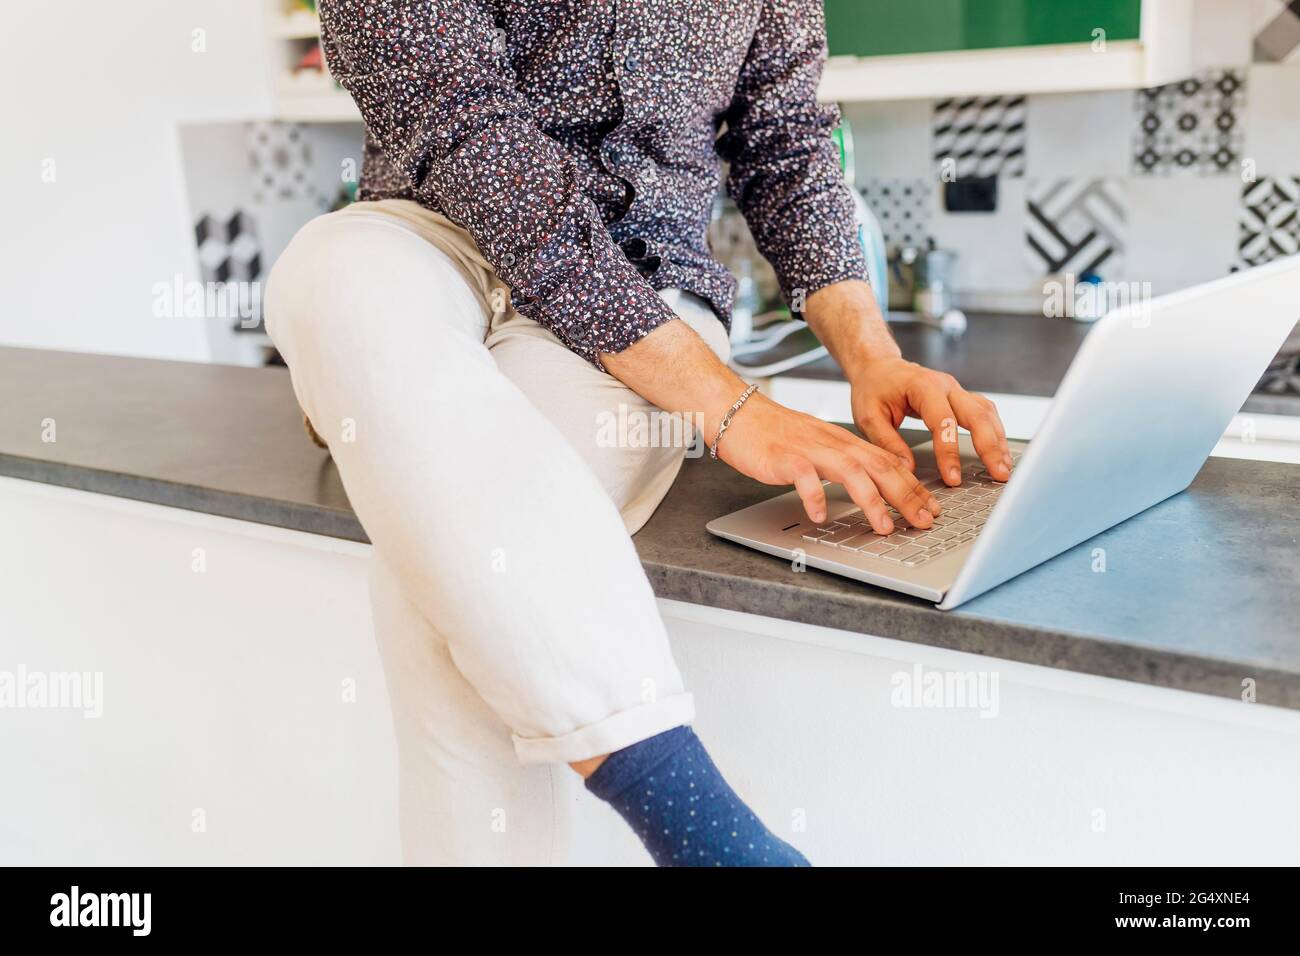 Man in casuals using laptop on kitchen island at home Stock Photo